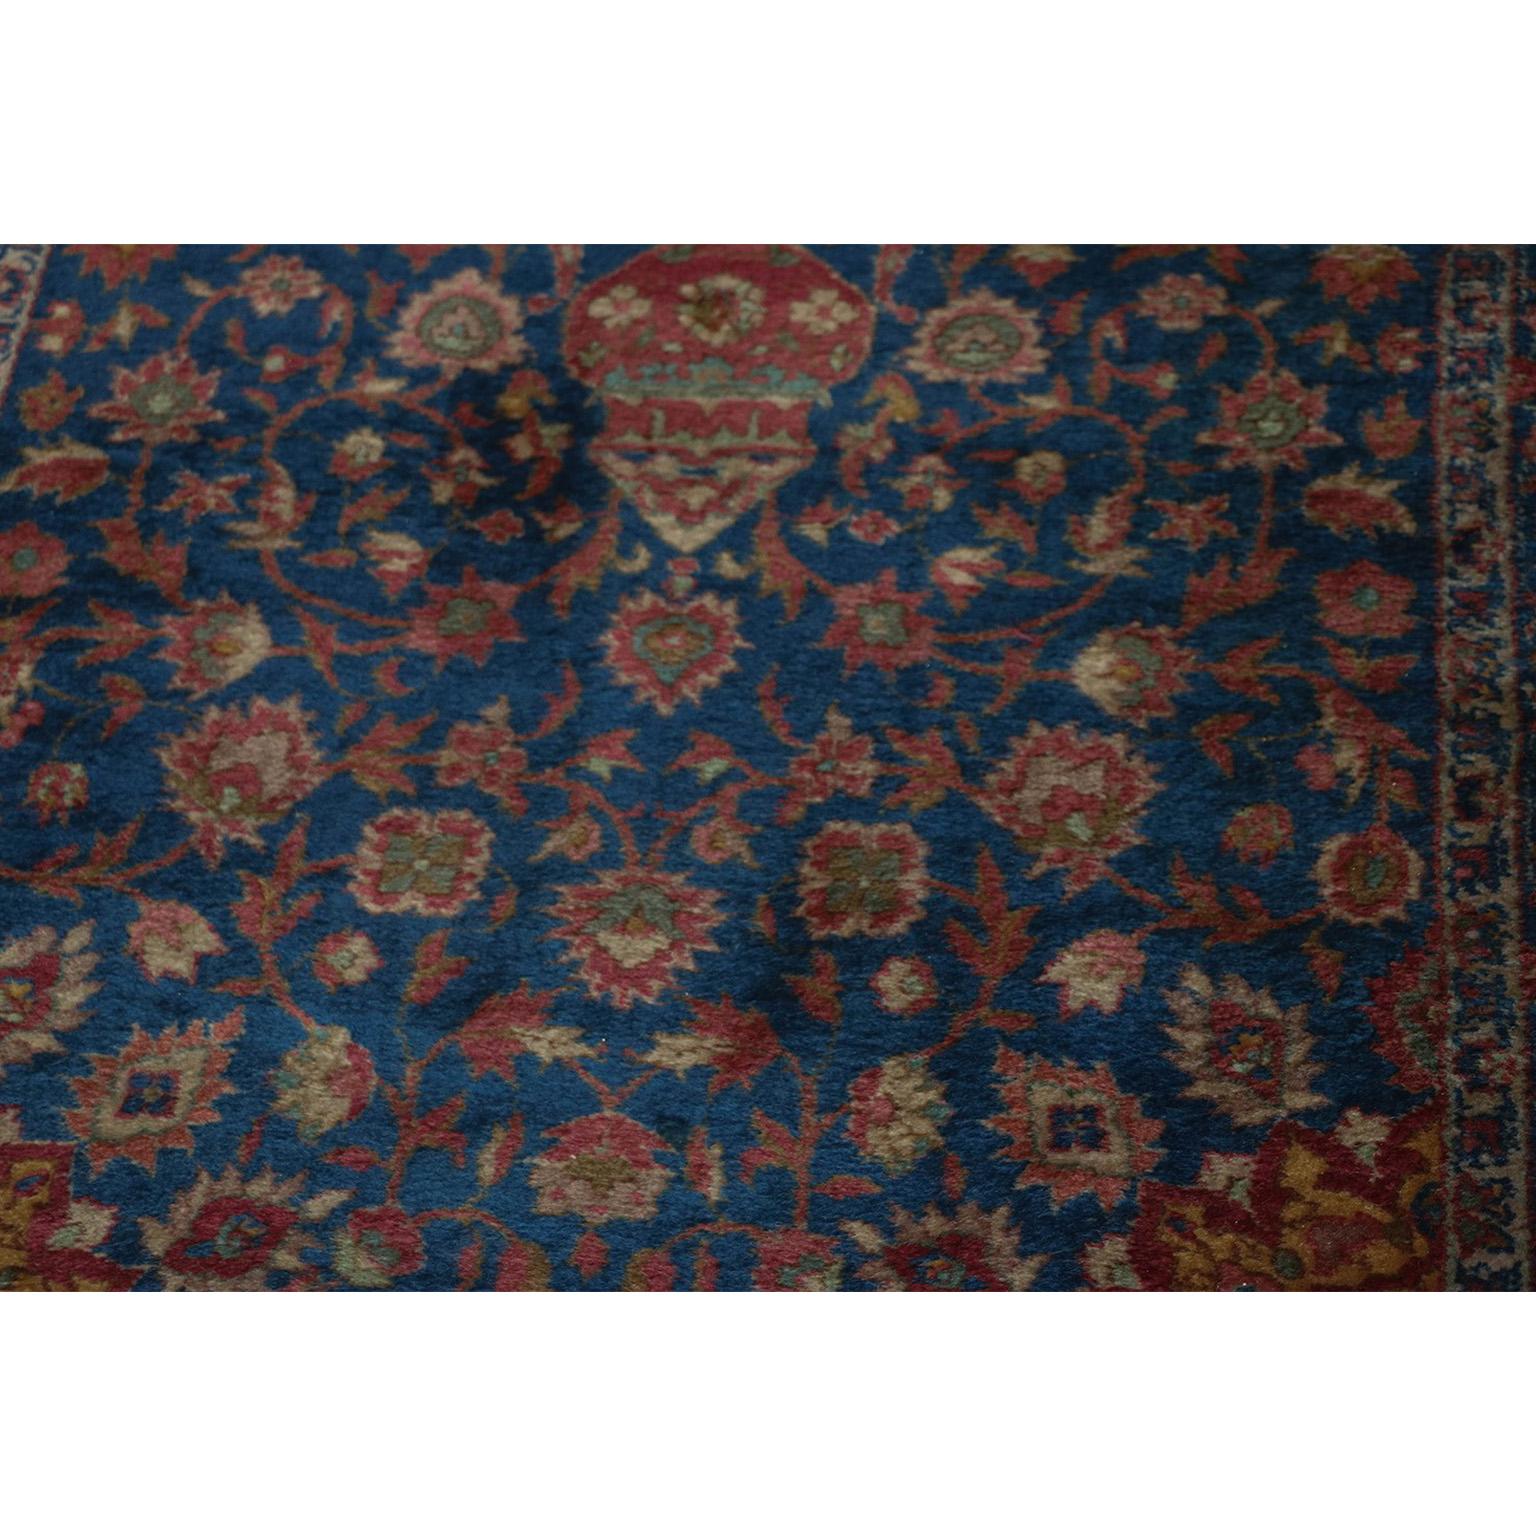 An absolutely stunning Muud rug, Khorassan district, wool on cotton foundation rug, was woven during the 20th century. And years later, the sturdy and rugged knotting in the rug has allowed it to survive in overall great condition, displays a